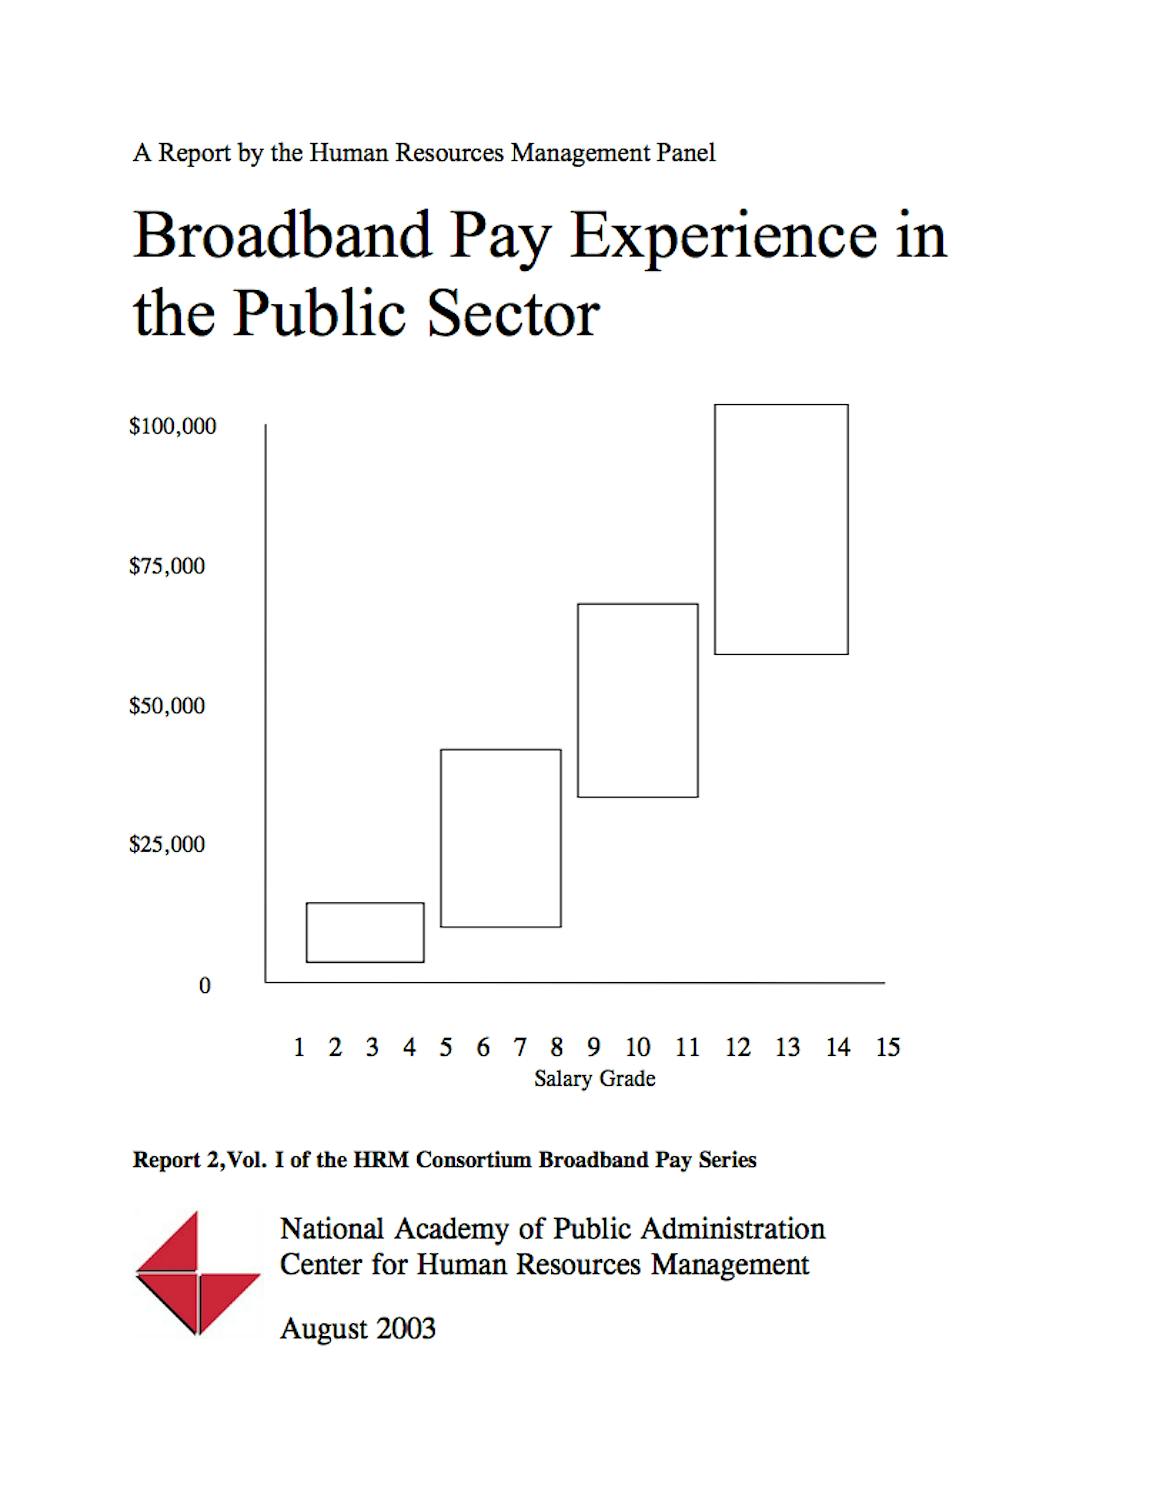 03 07 Broadband Pay Experience Public Sector